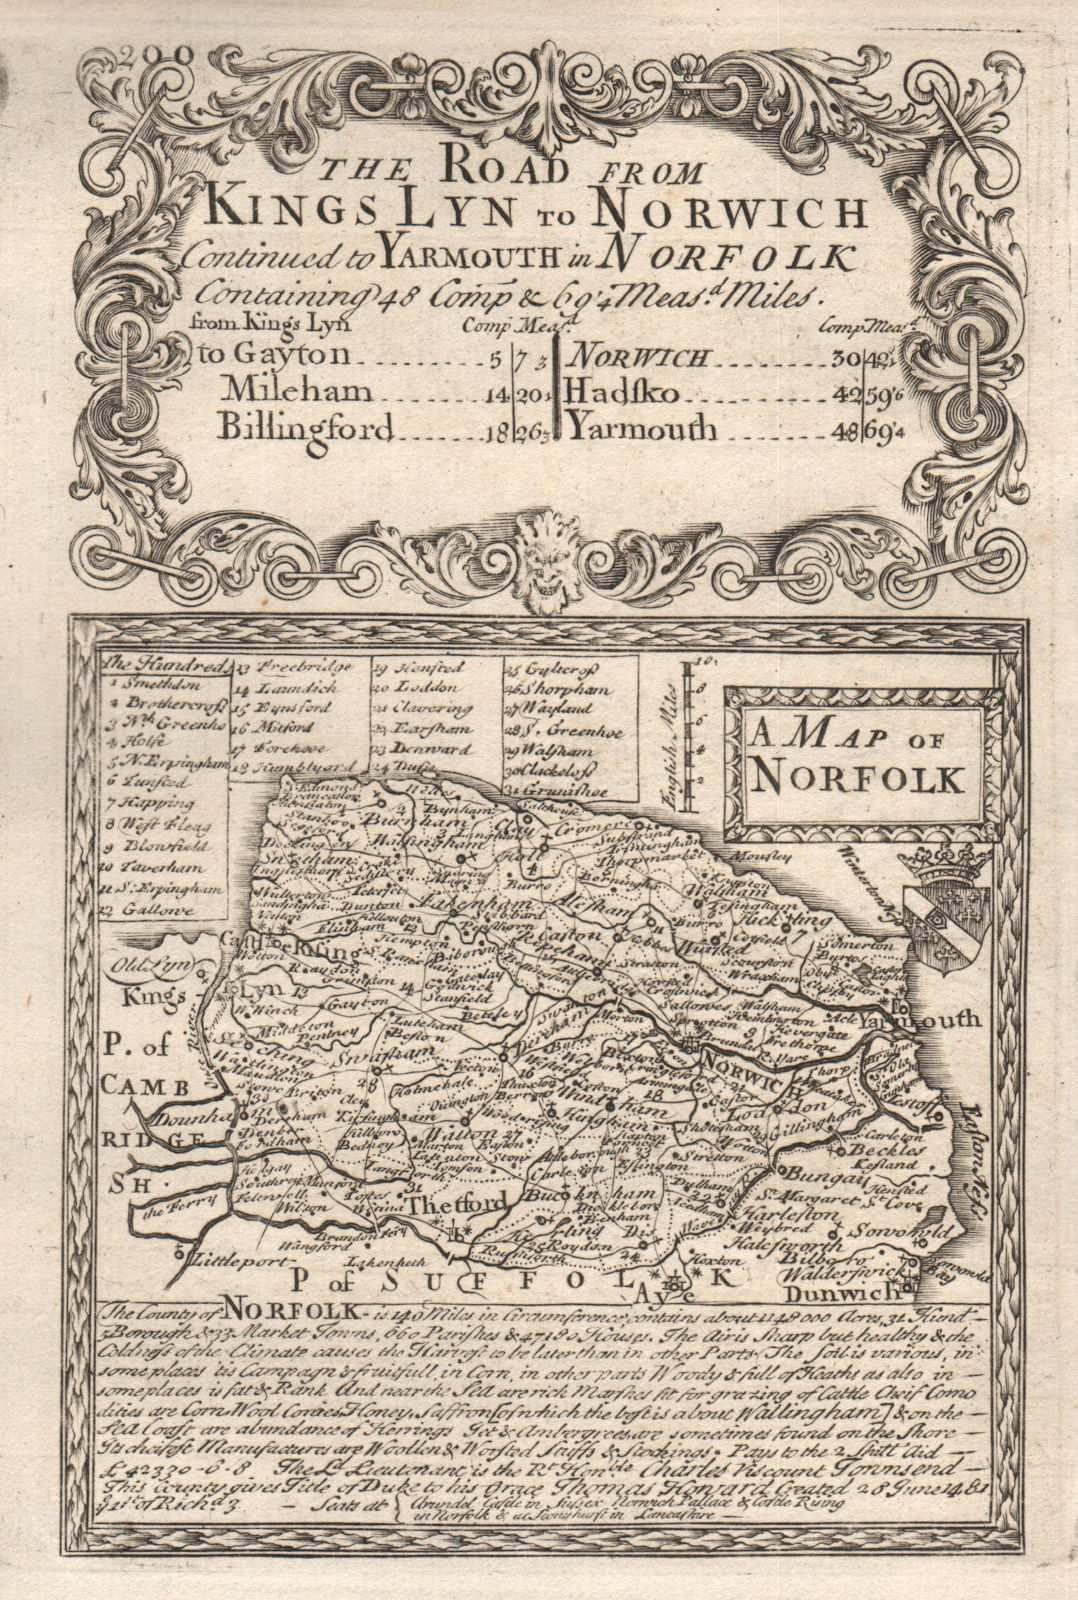 Associate Product 'A Map of Norfolk'. County map by J. OWEN & E. BOWEN 1753 old antique